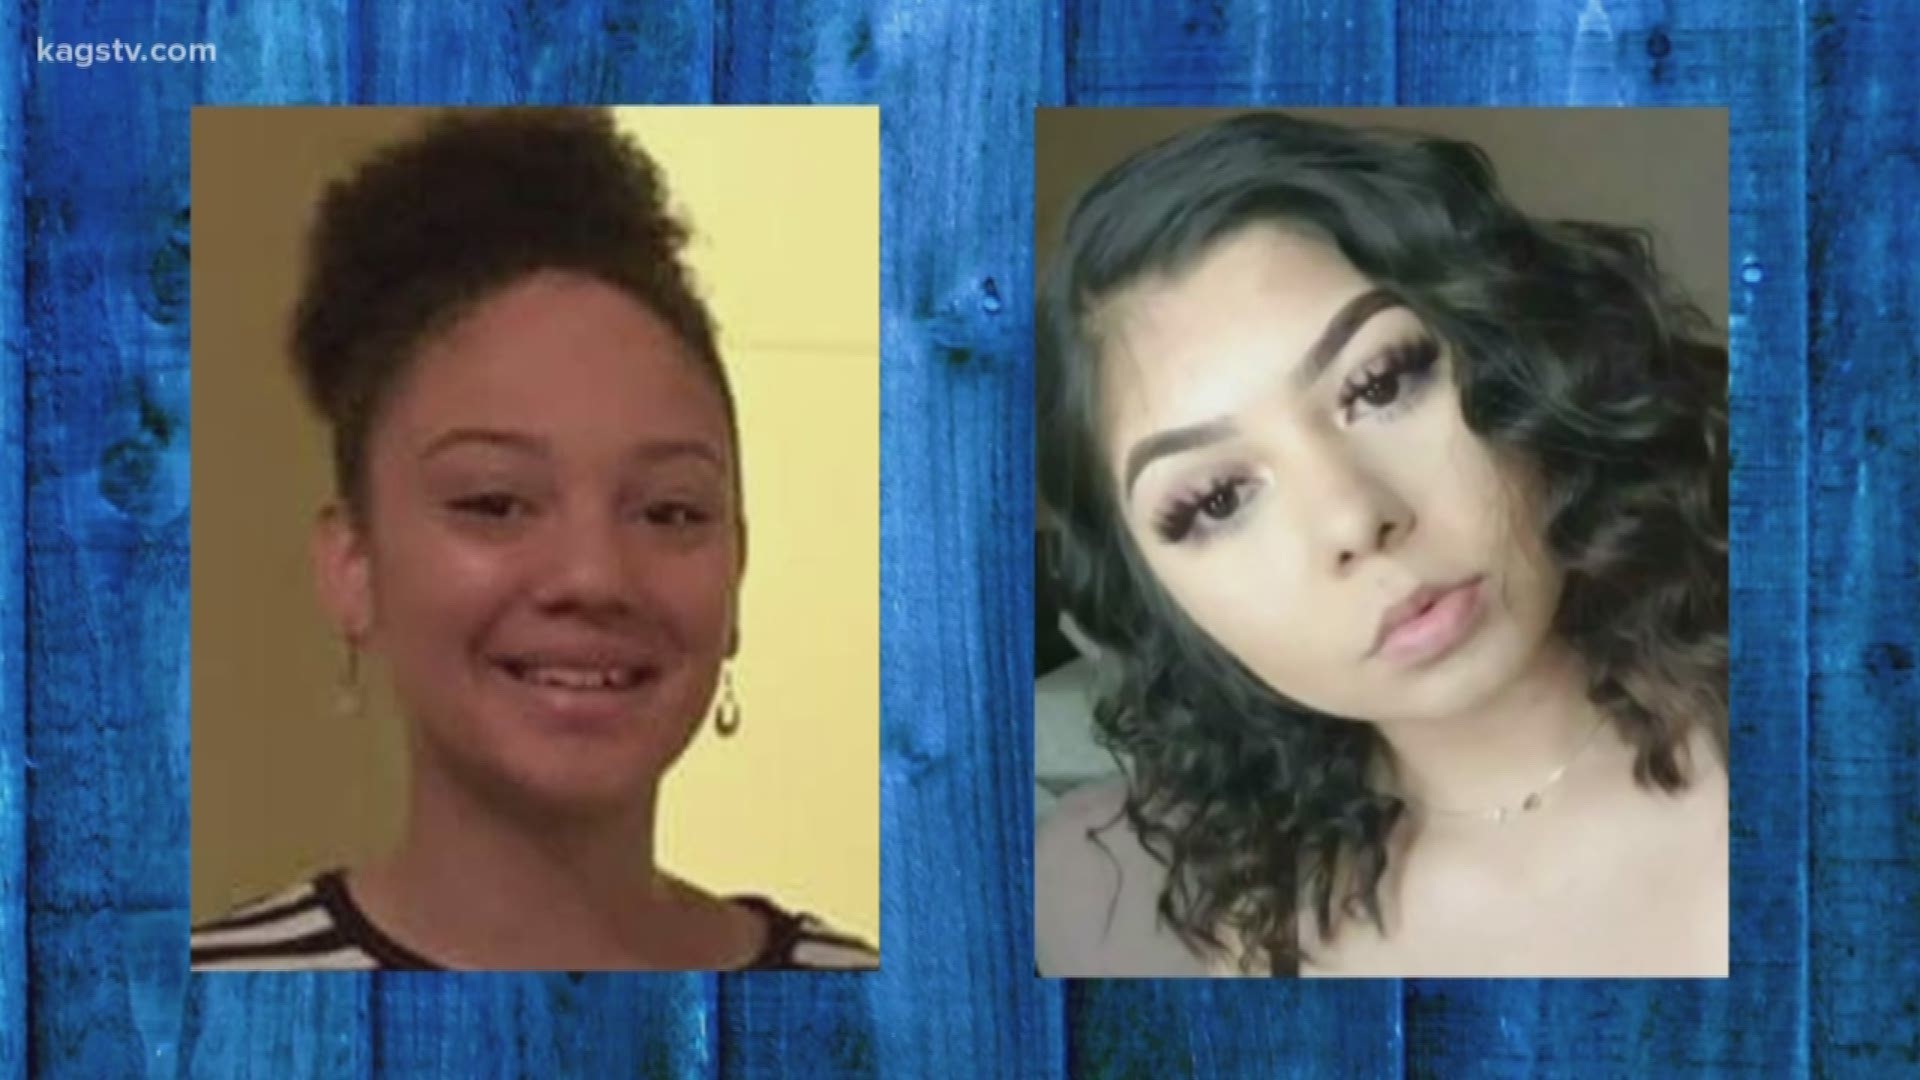 The teens were last seen Oct. 10 leaving their school, according to a Facebook post from the College Station Police Department.